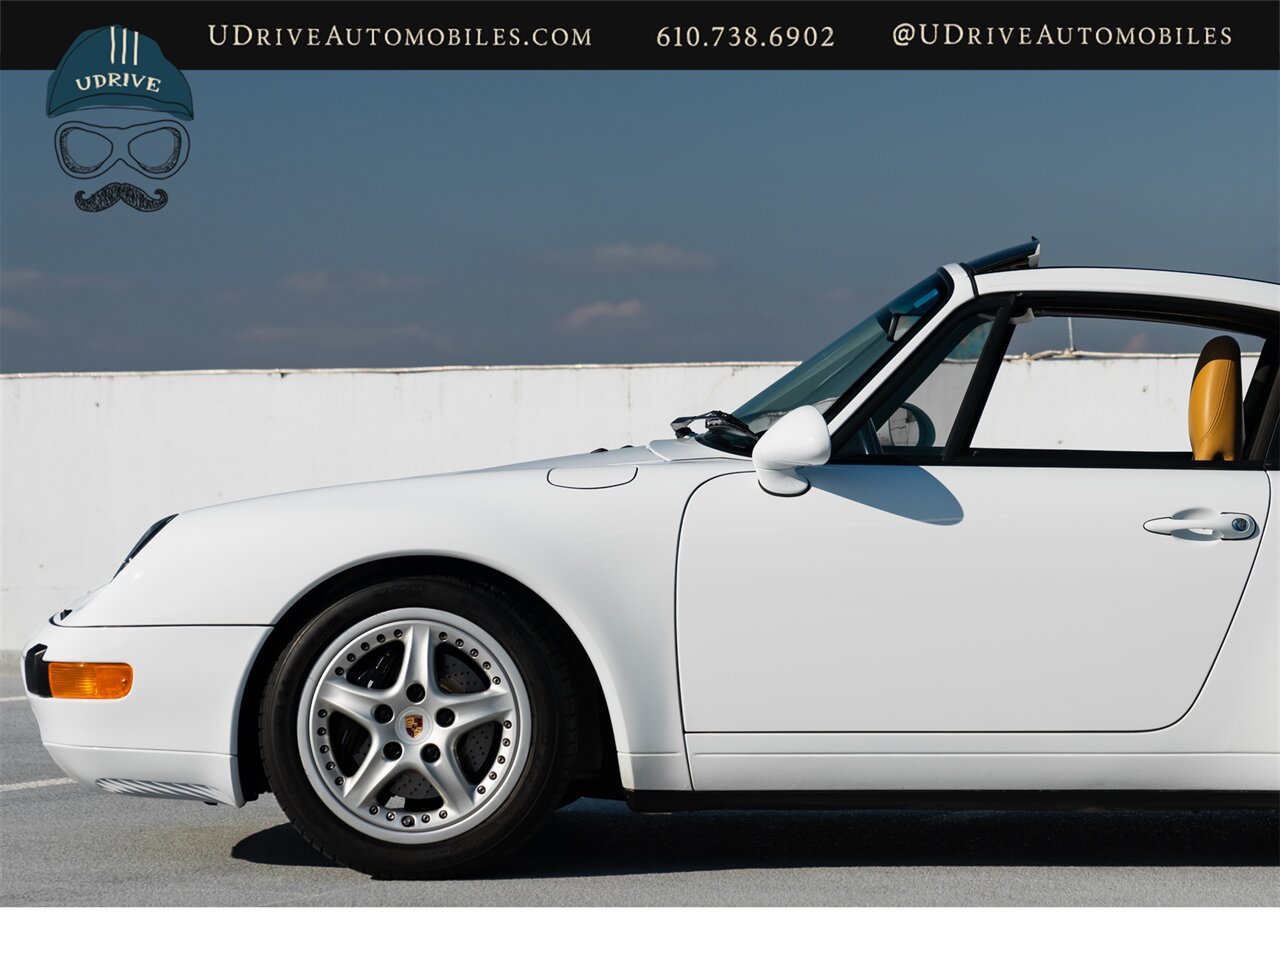 1998 Porsche 911 Carrera 993 Targa  1 of 122 Produced 6 Speed $10k Recent Service Engine Reseal - Photo 10 - West Chester, PA 19382